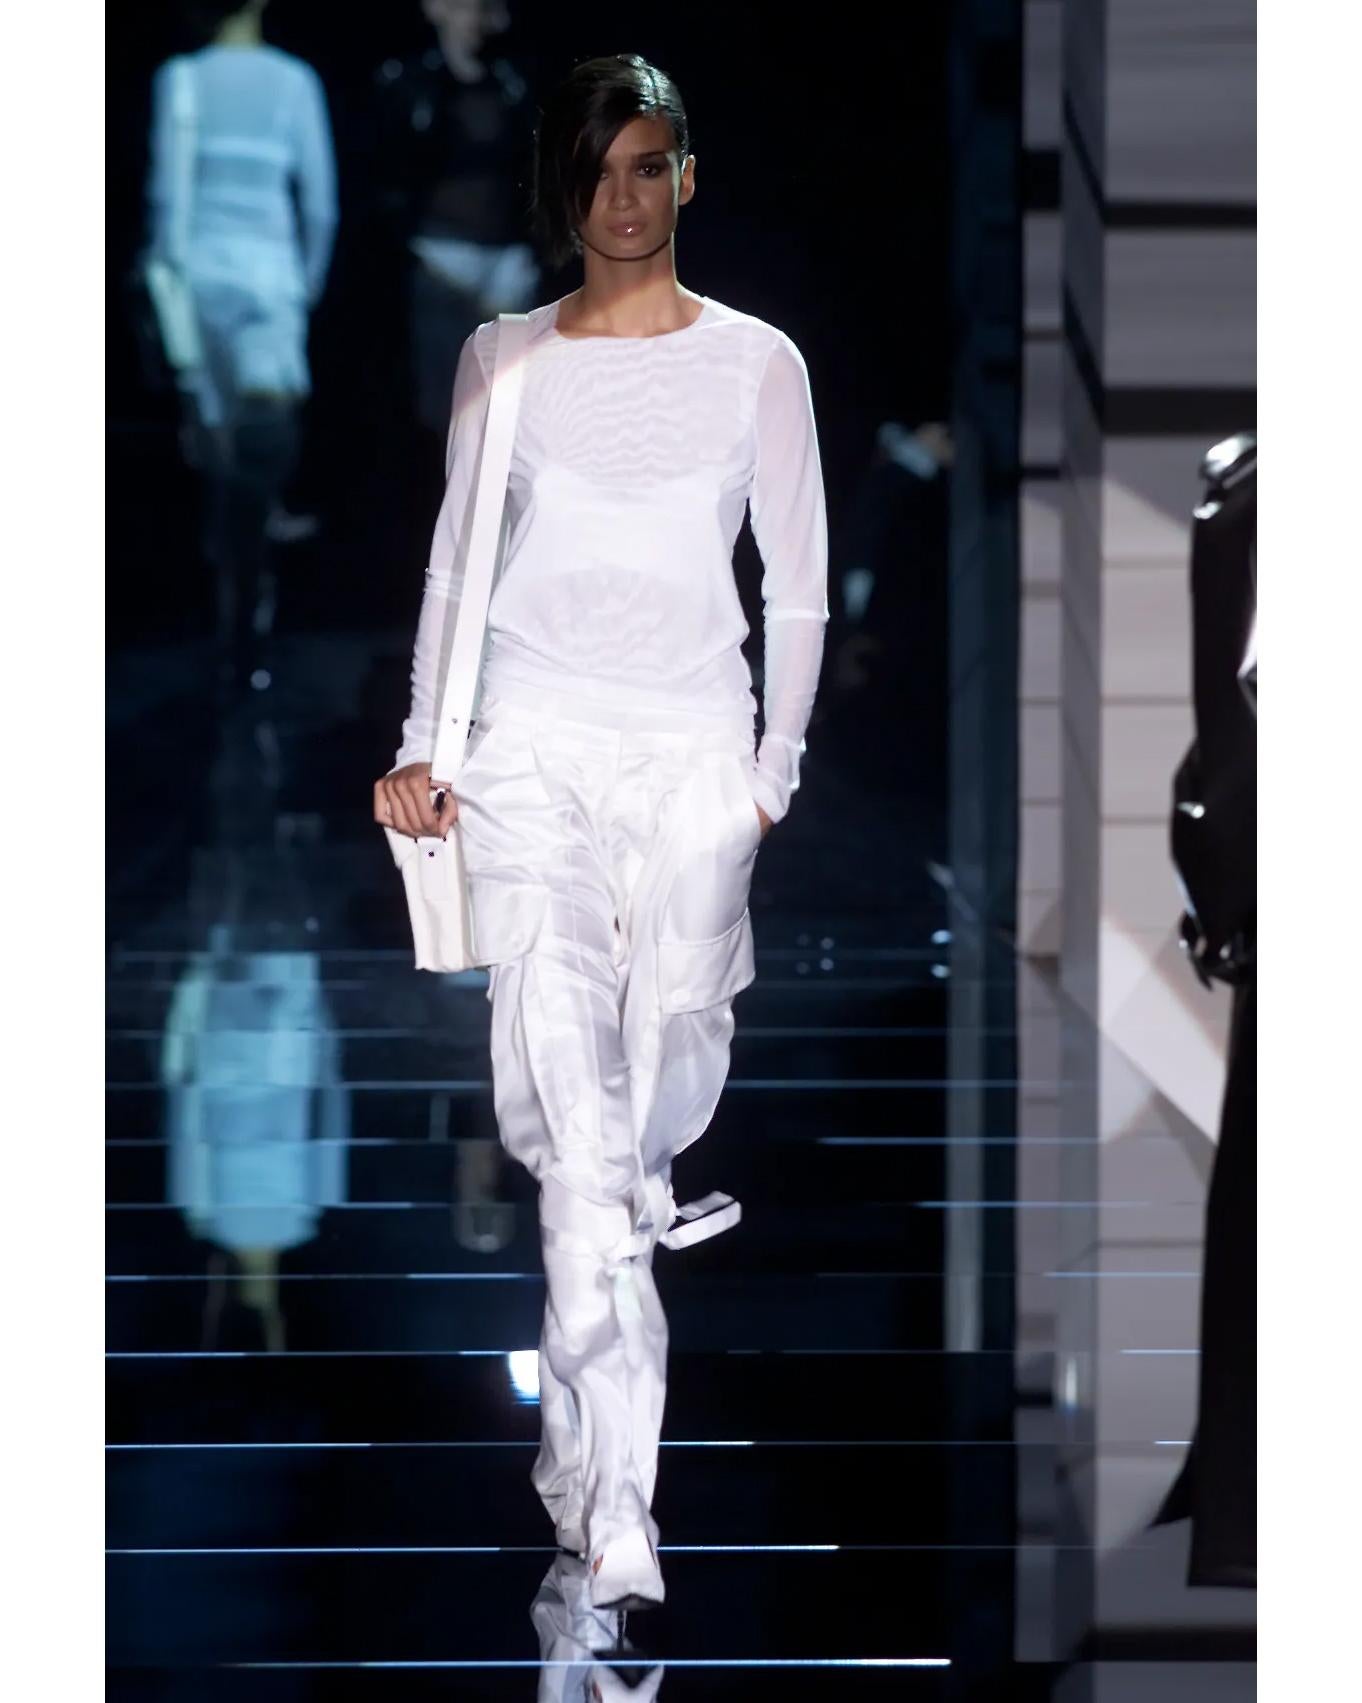 S/S 2001 Gucci by Tom Ford ecru silk side-tie cargo pants. High rise off-white cargo-style trousers with oversized side flap pockets with wrap-around ties. Concealed front button closure, and stamped button closures throughout. Double button closure